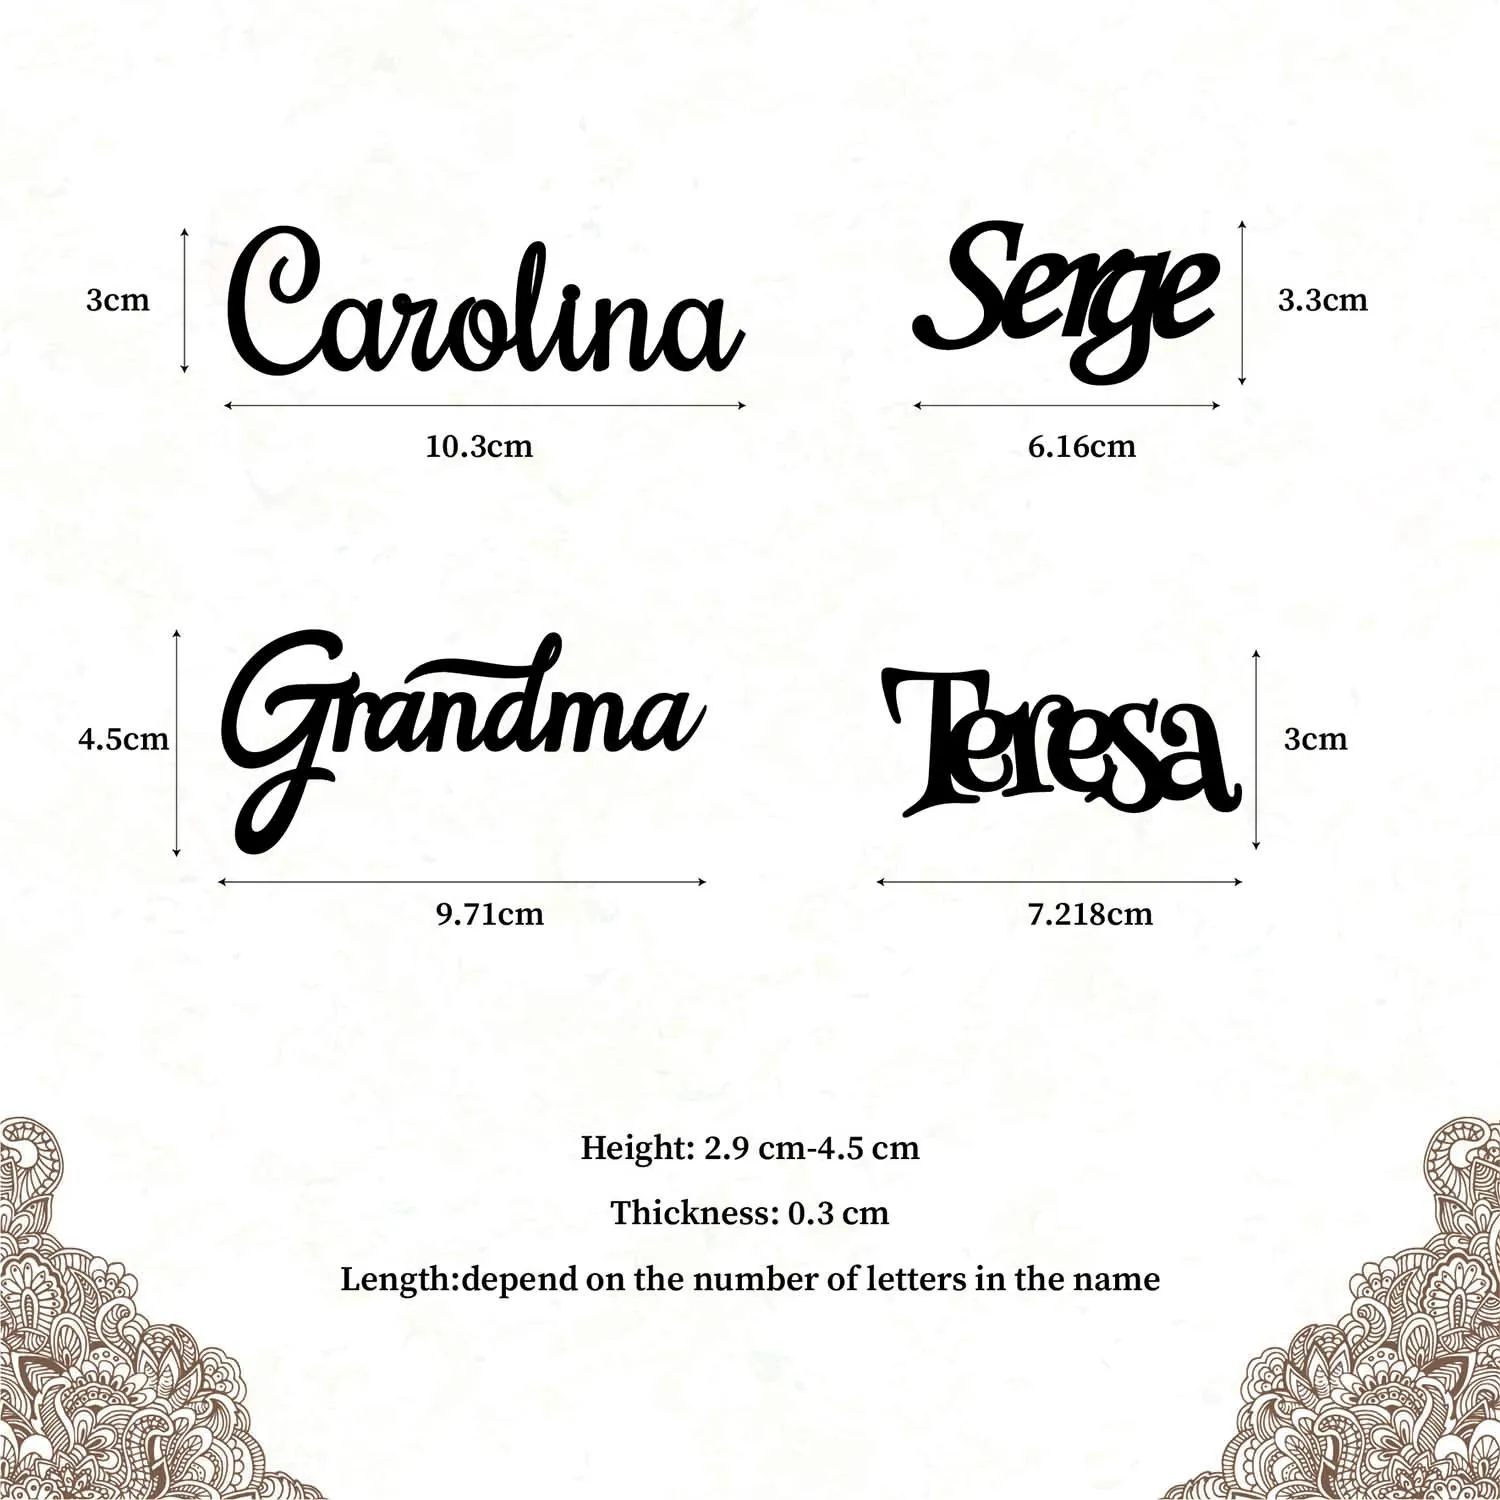 Personalized Wedding Venue Table Cards,Laser Cut Names,Custom Guest Names,Wooden Names,Bride and Groom,Birthday Location Cards